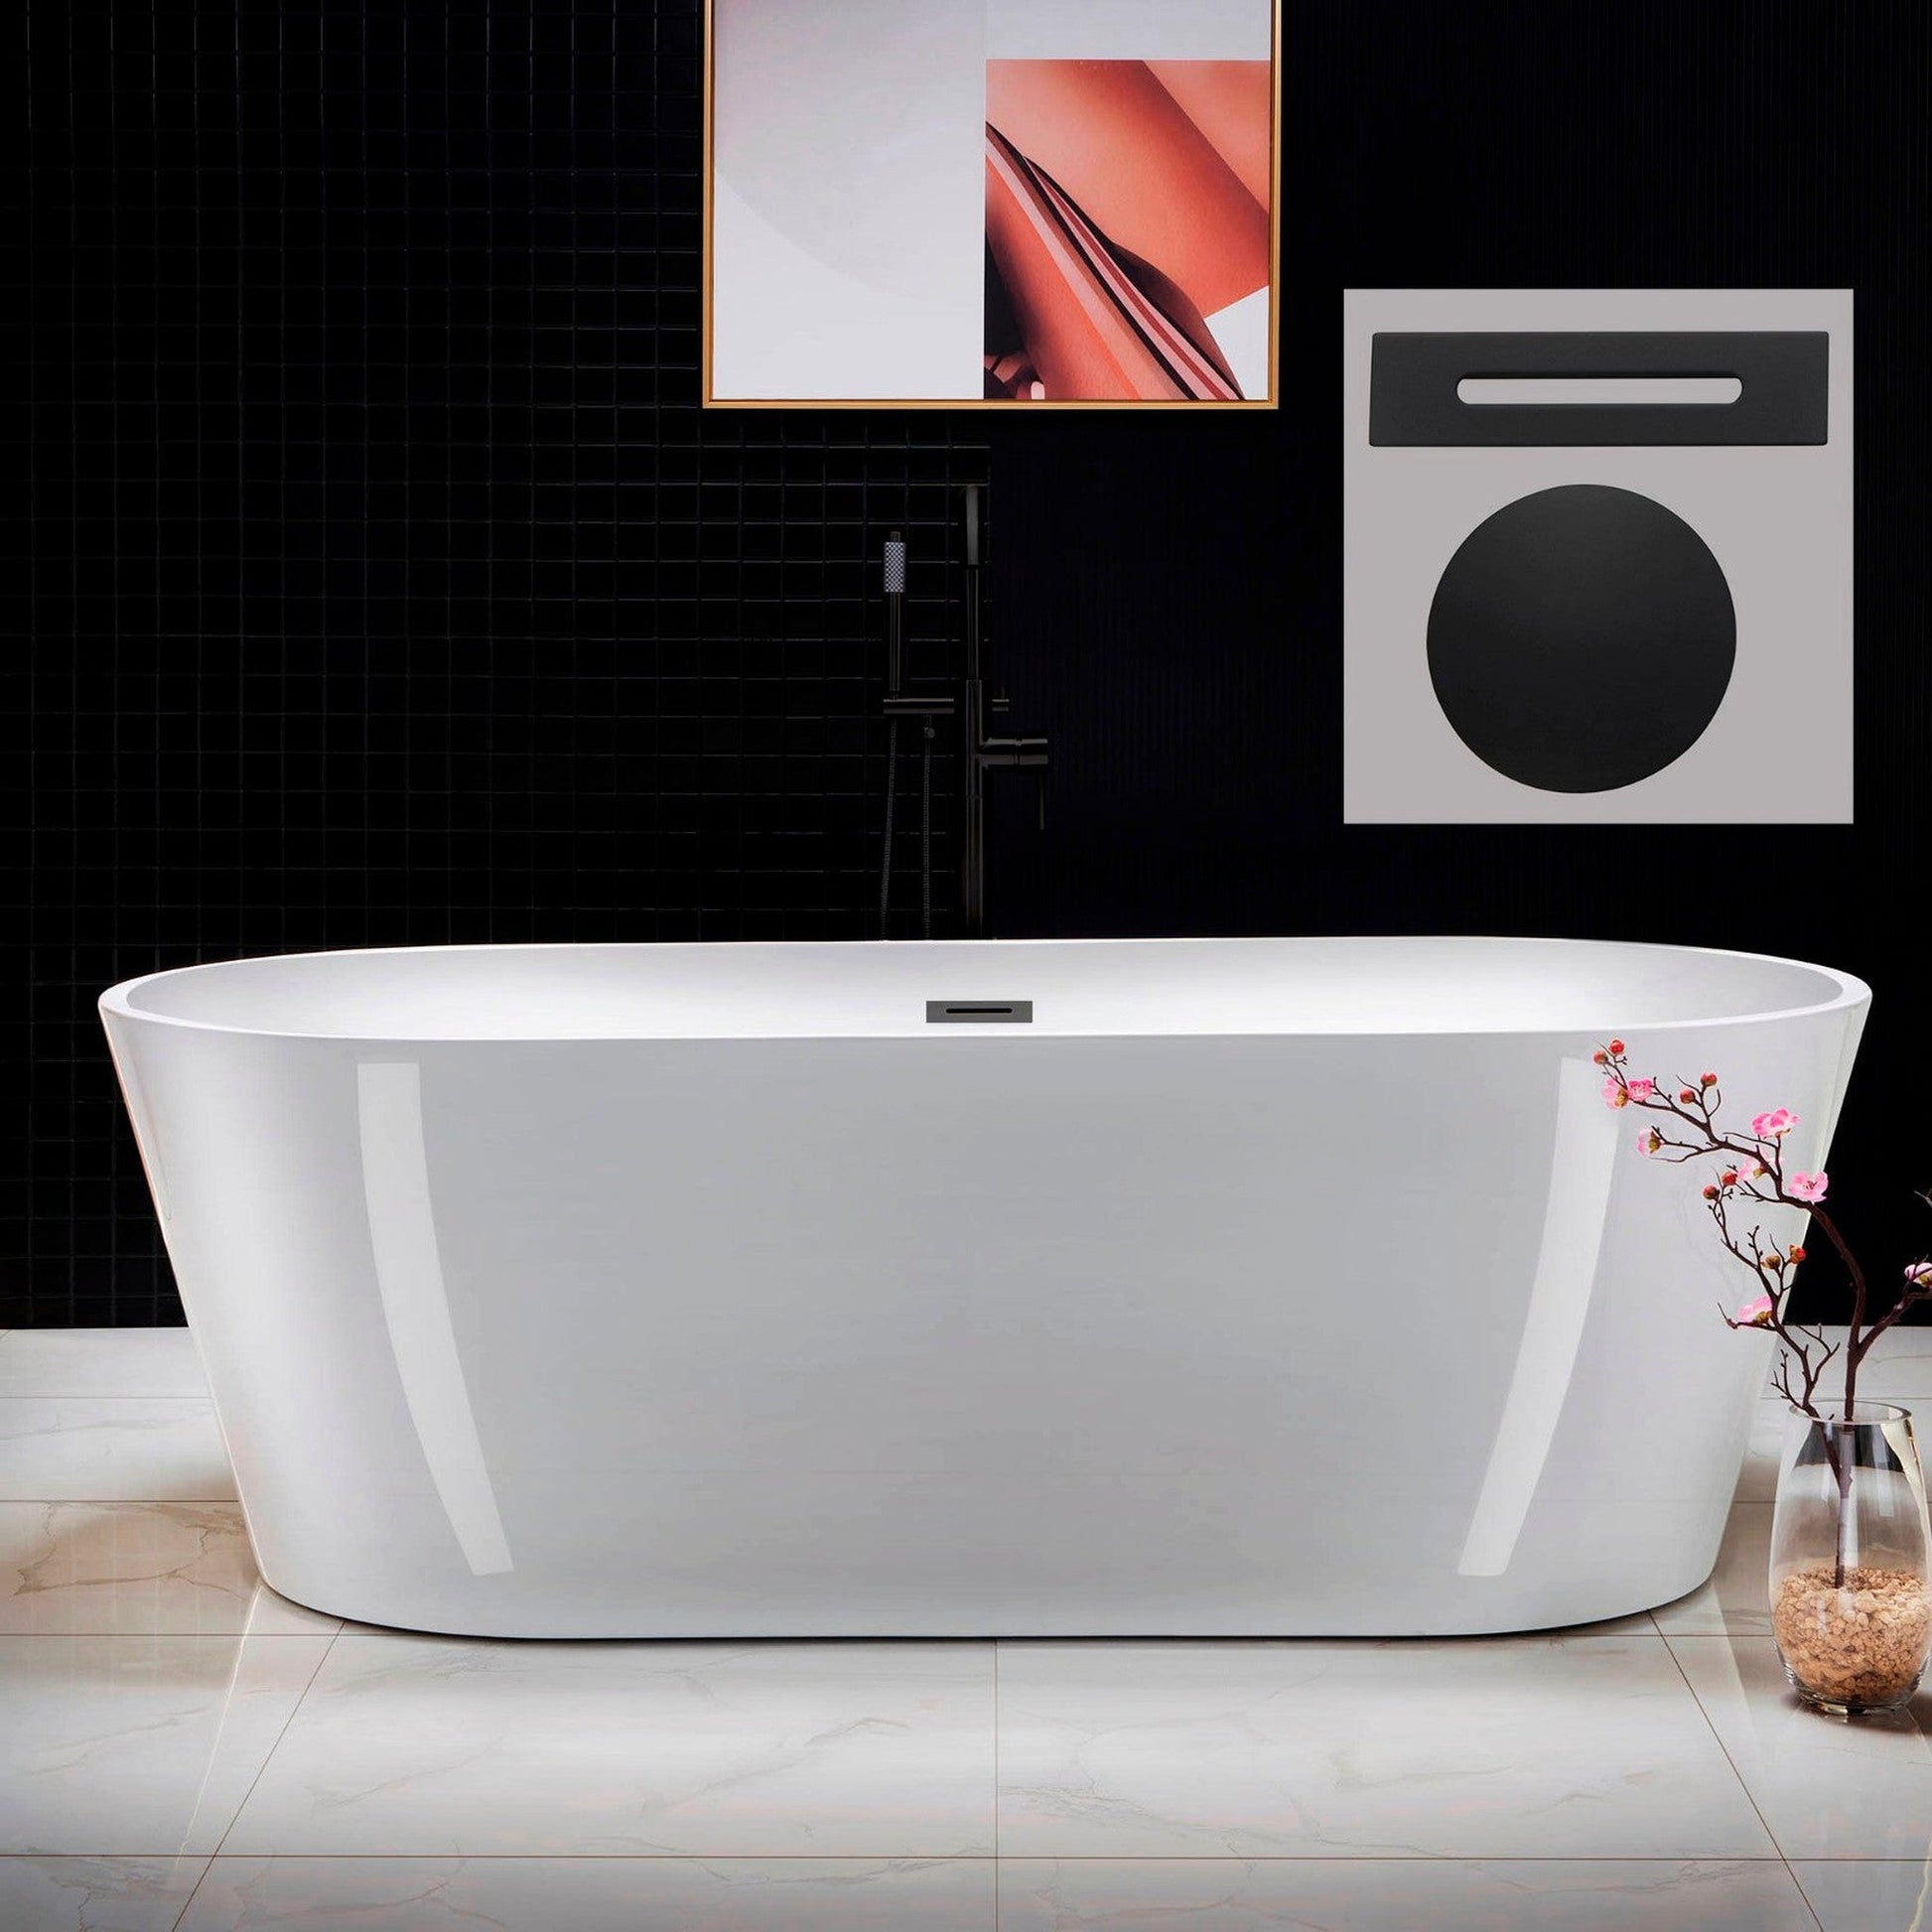 WoodBridge 71" White Acrylic Freestanding Contemporary Soaking Bathtub With Matte Black Drain, Overflow, F0072MBSQ Tub Filler and Caddy Tray